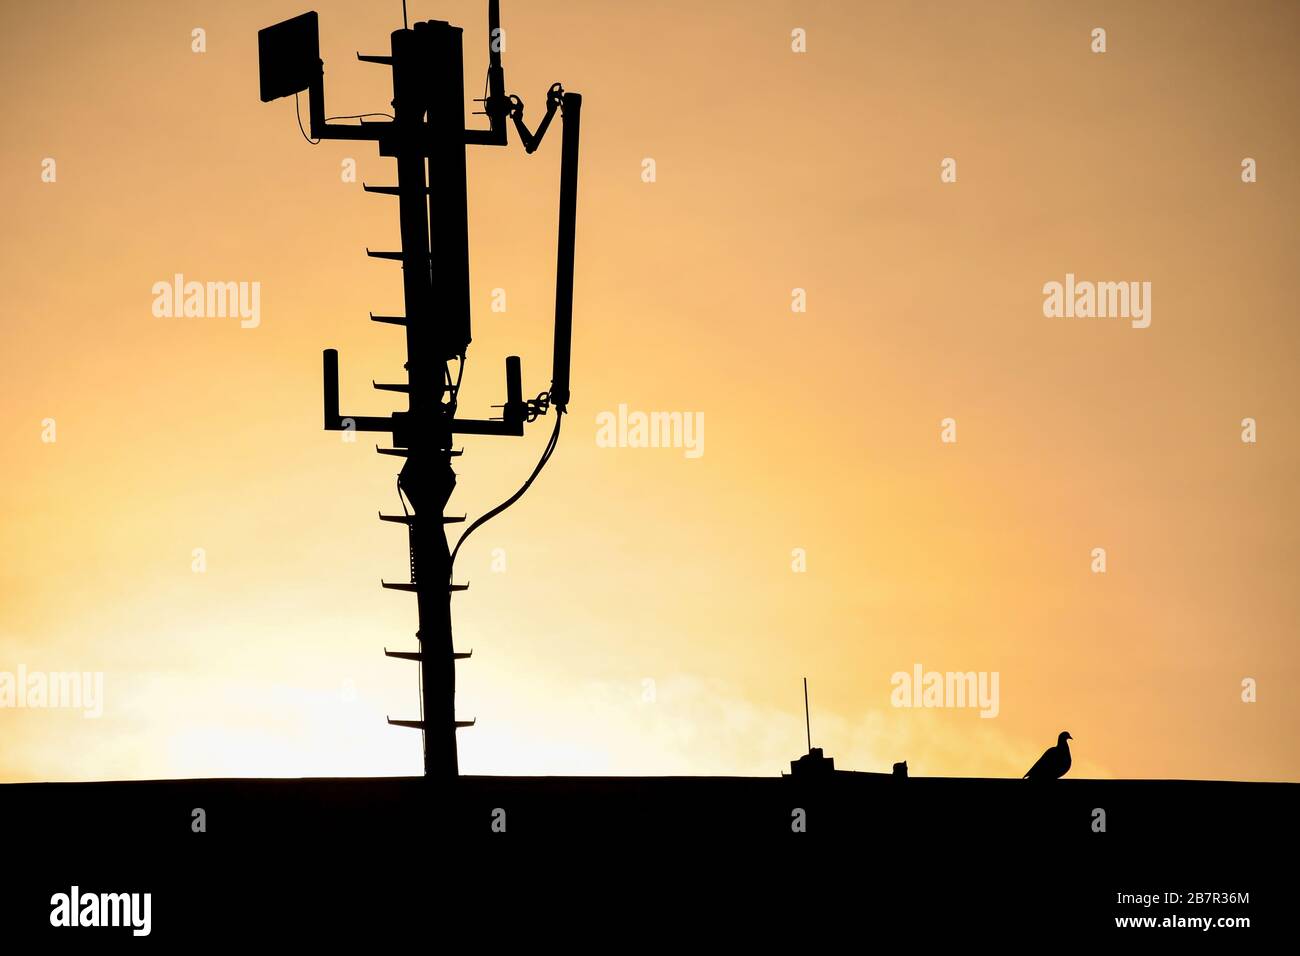 Silhouette of a radio telecommunication network antenna mounted on a metal pole providing strong signal waves from the top of the roof with sunrise an Stock Photo